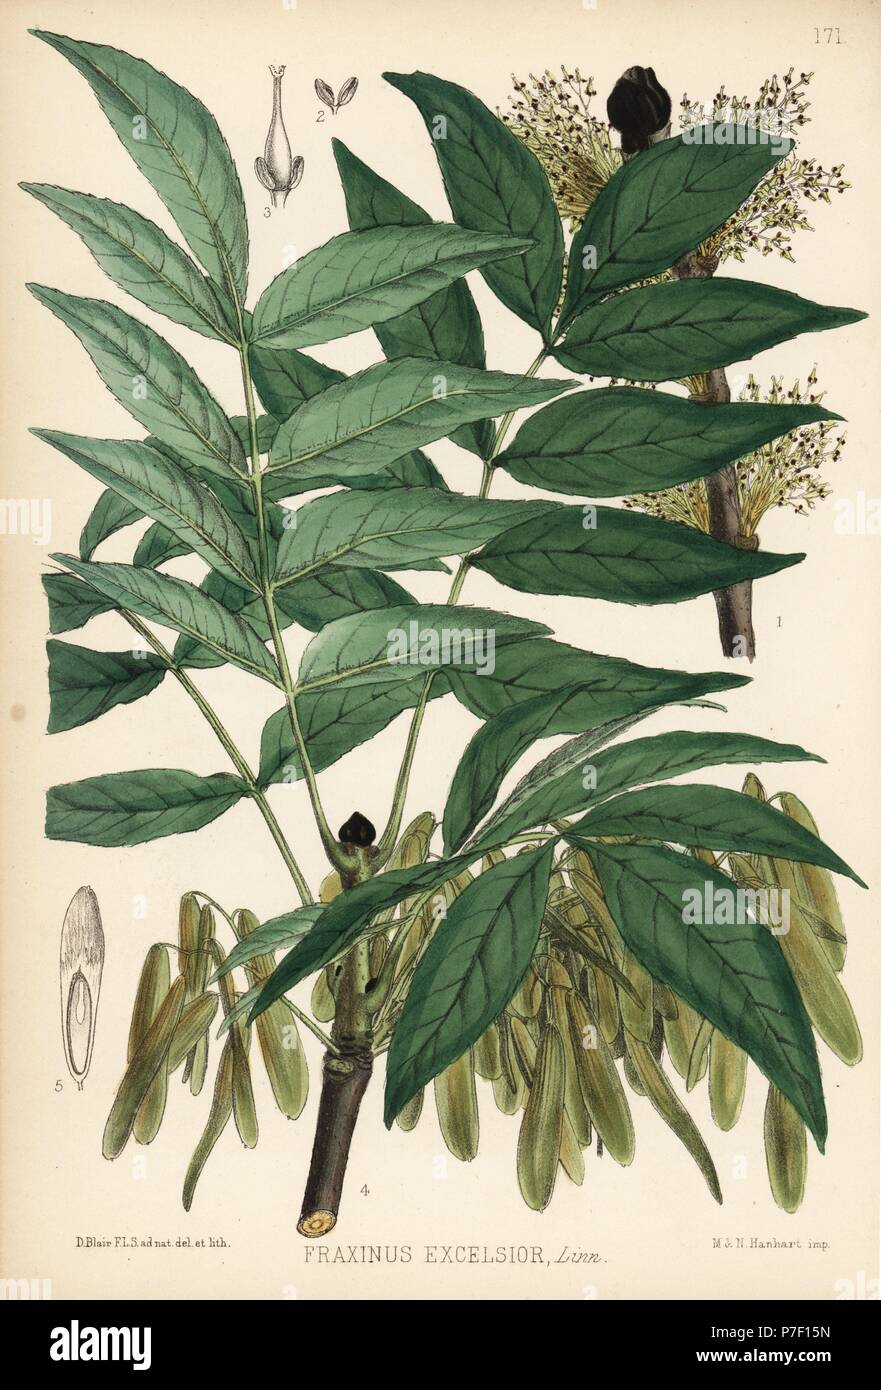 Ash tree, Fraxinus excelsior. Handcoloured lithograph by Hanhart after a botanical illustration by David Blair from Robert Bentley and Henry Trimen's Medicinal Plants, London, 1880. Stock Photo